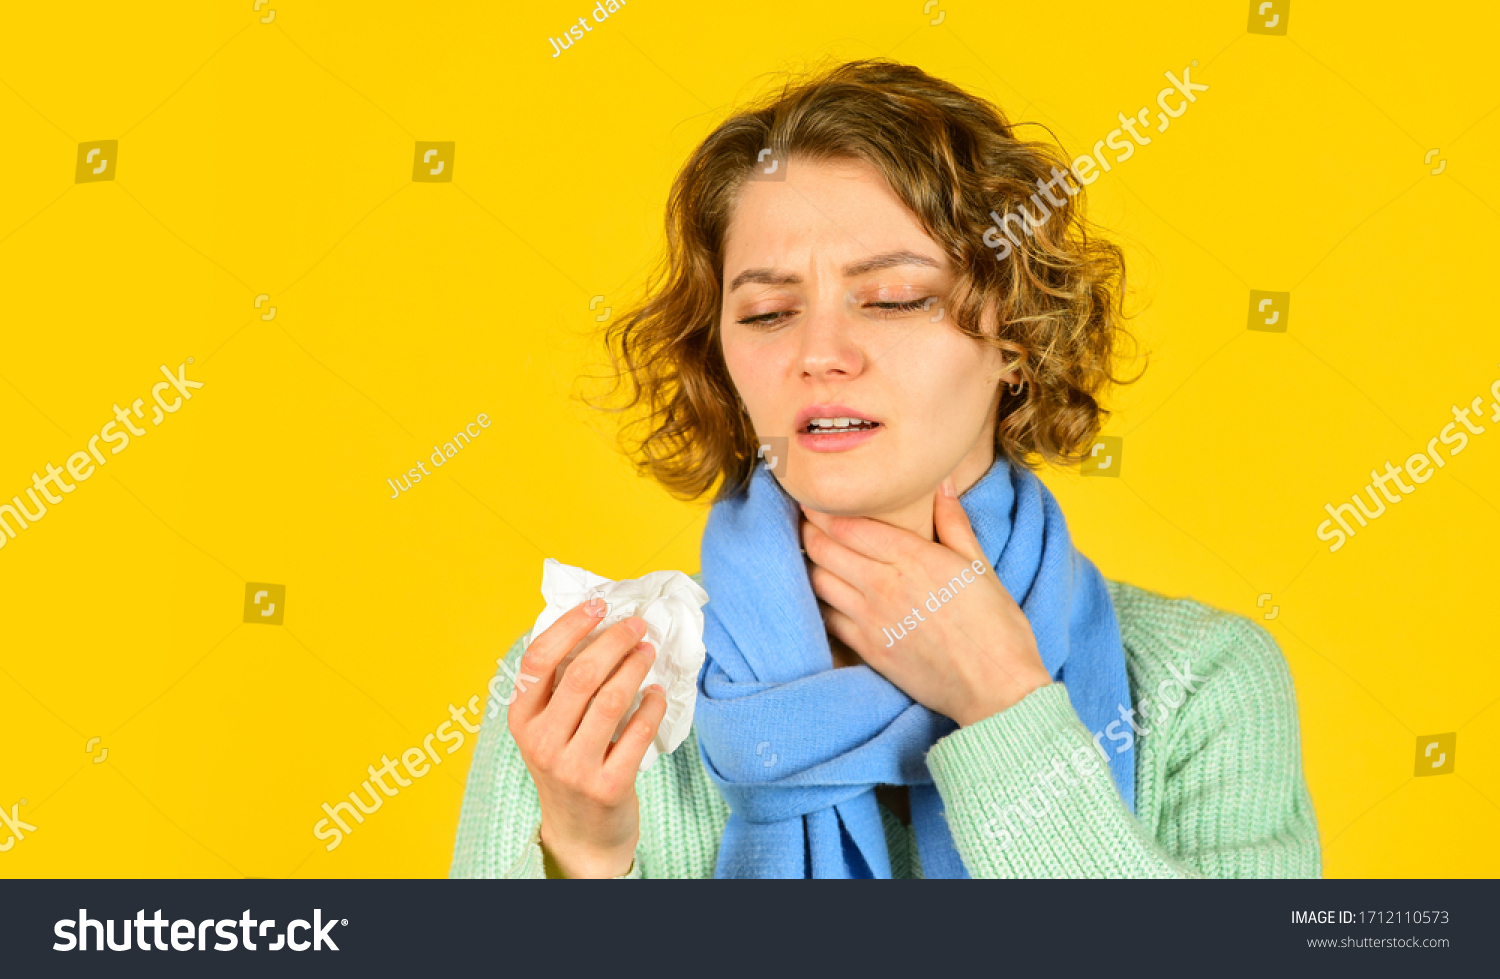 runny nose caused by illness. ill with laryngitis. Acute respiratory viral. sick girl with runny nose. influenza infection and pneumonia. Coronavirus outbreak concept. Symptoms of disease. copy space. #1712110573